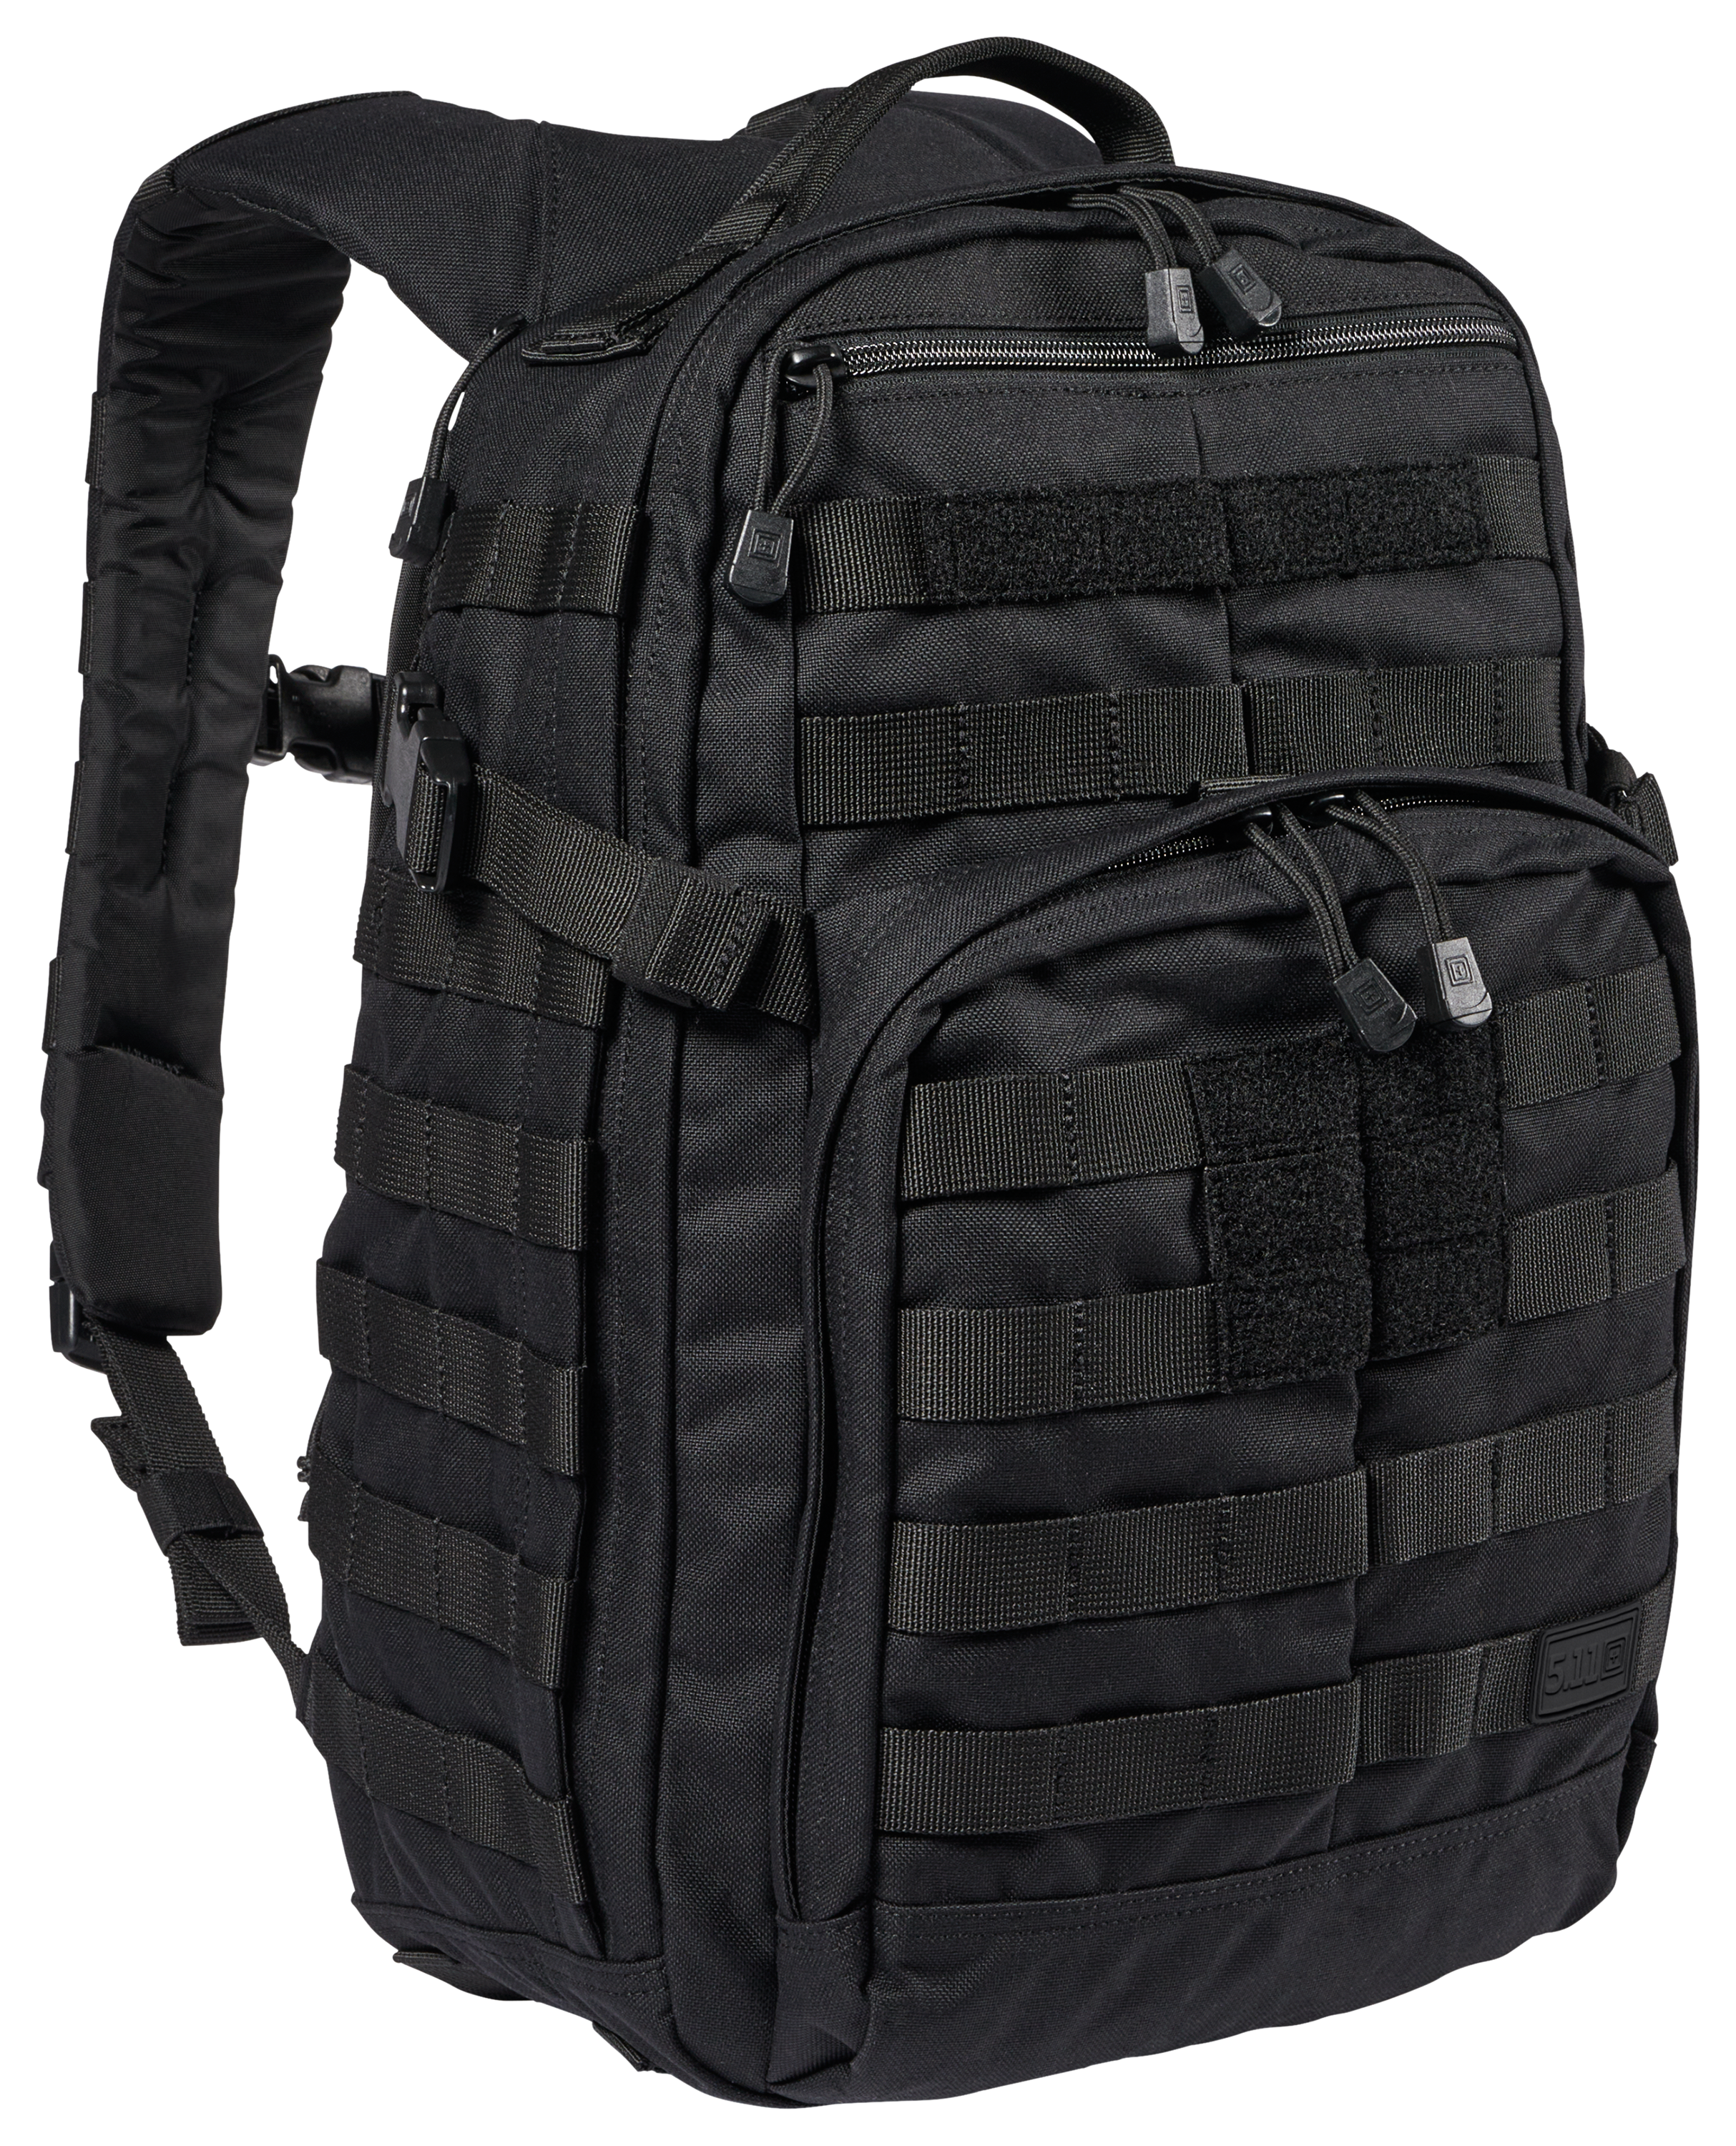 5.11 Tactical Rush12 2.0 Backpack 24L - Double Tap